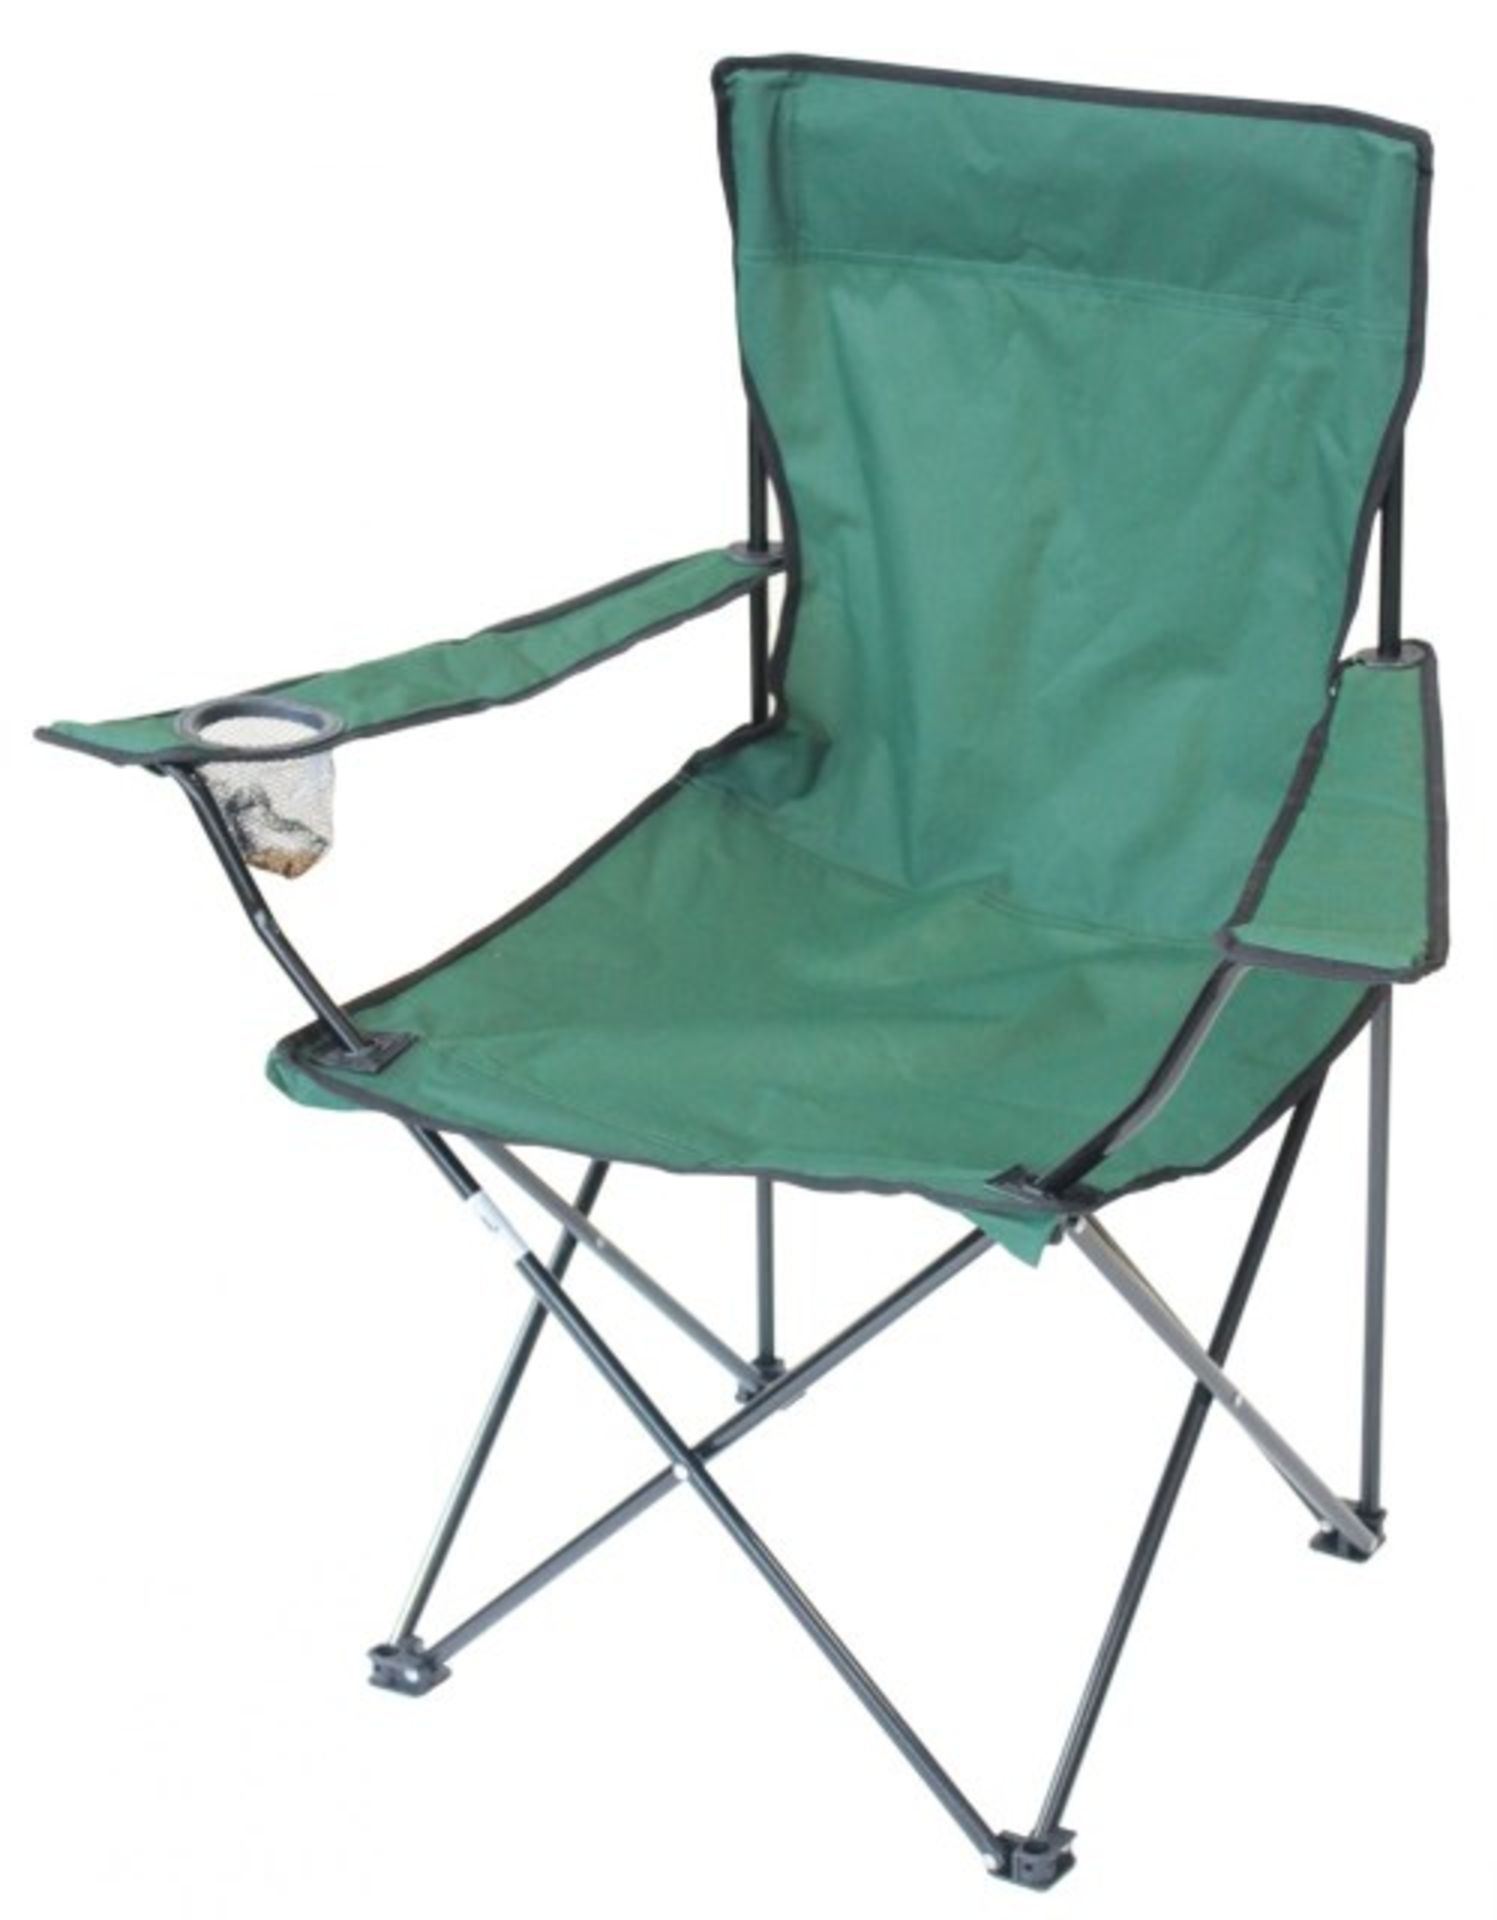 V Brand New Essential Camping Chair With Cup Holder X 6 Bid price to be multiplied by Six